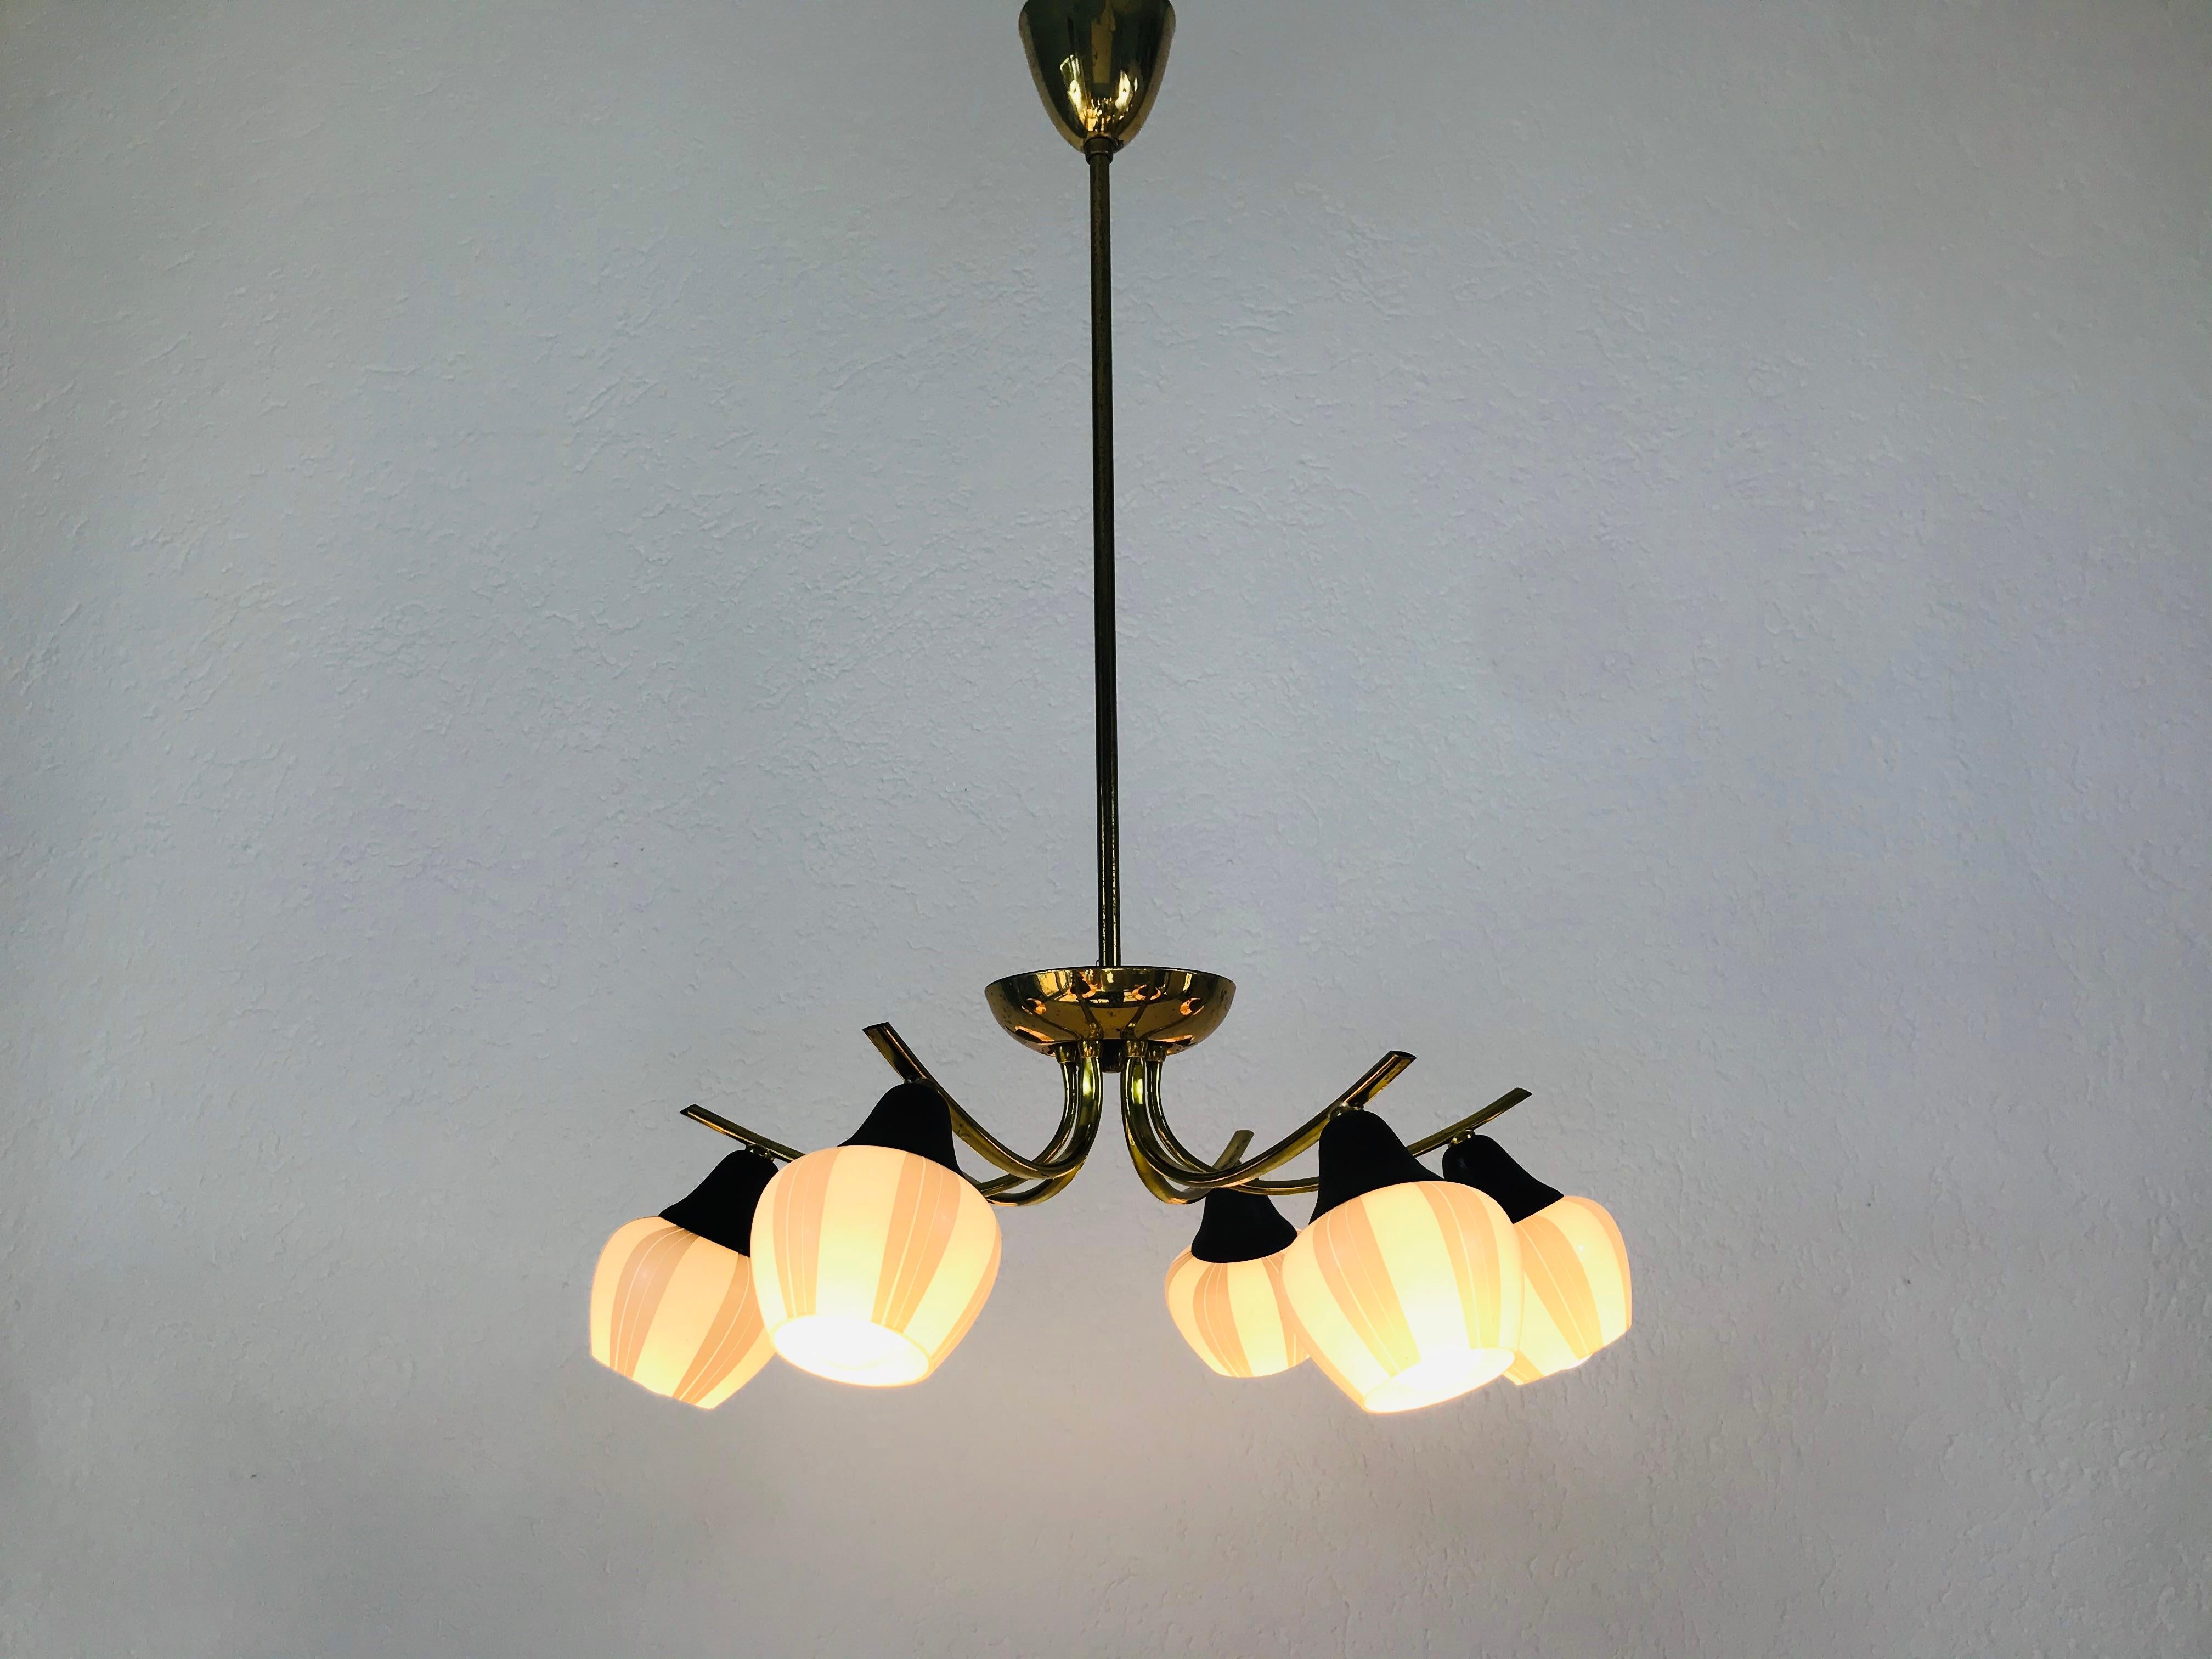 A midcentury chandelier made in France in the 1960s. Its very elegant and its design makes the light very exclusive. Six opaline glass shades.

Measurements:

Height 68 cm

Diameter 45 cm

The light requires six E14 light bulbs.